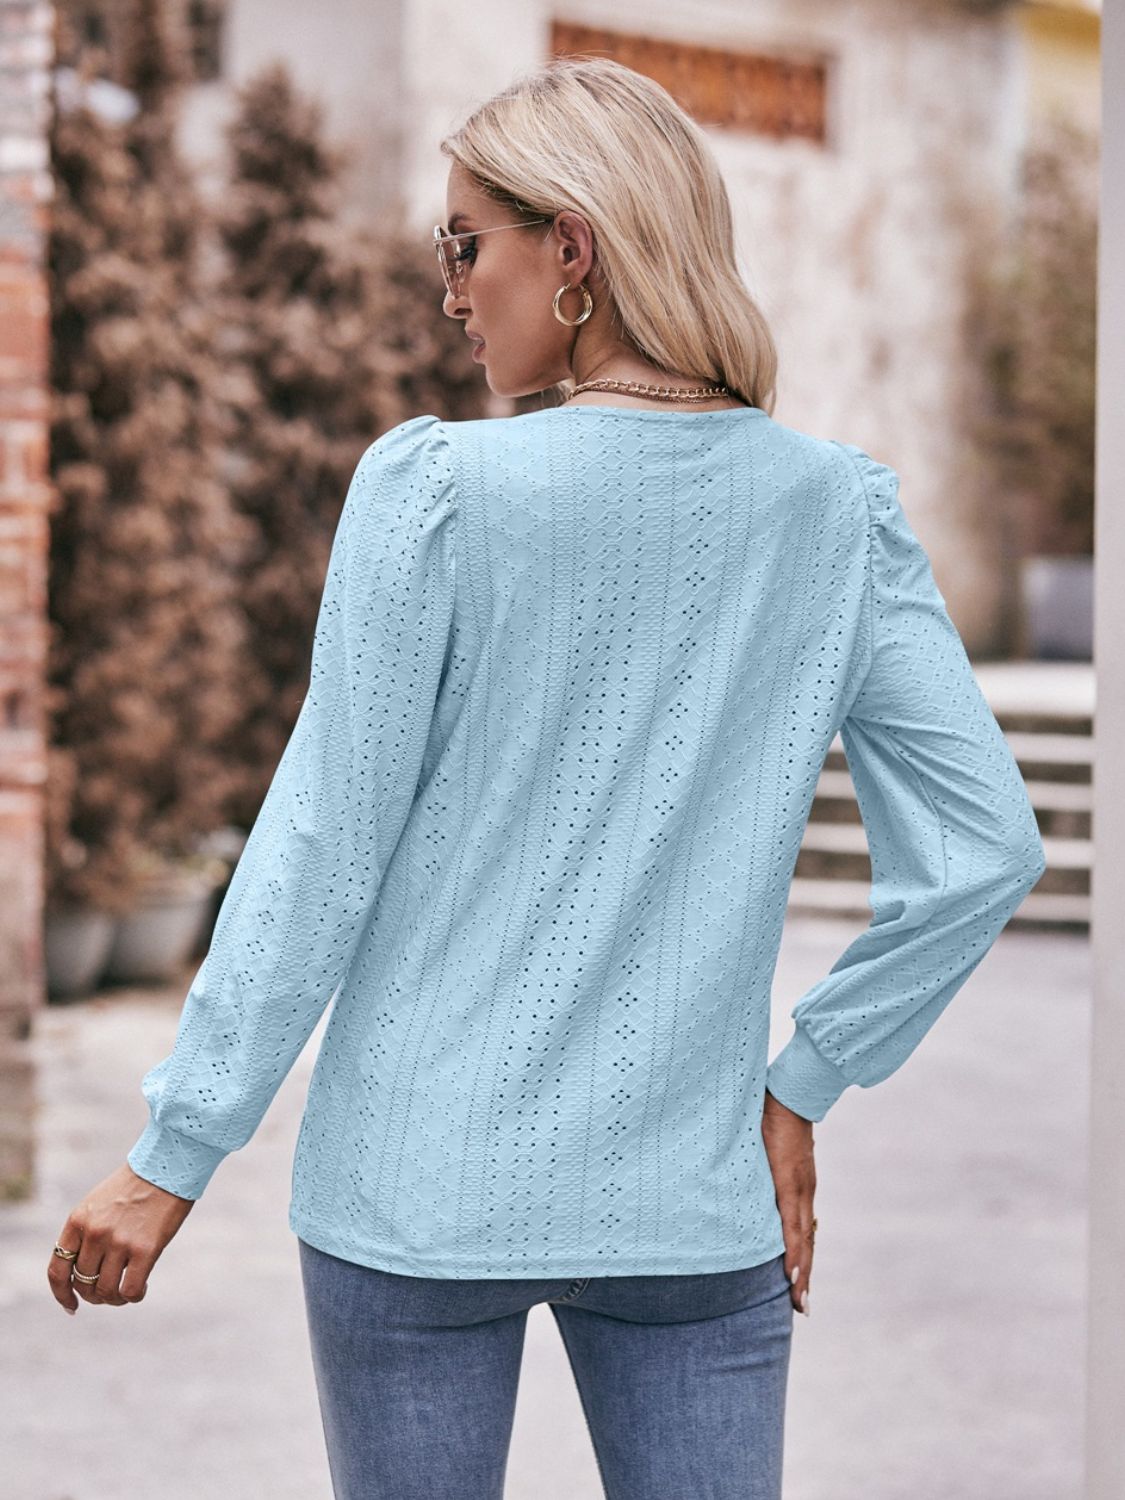 Eyelet Square Neck Puff Sleeve Blouse - FunkyPeacockStore (Store description)